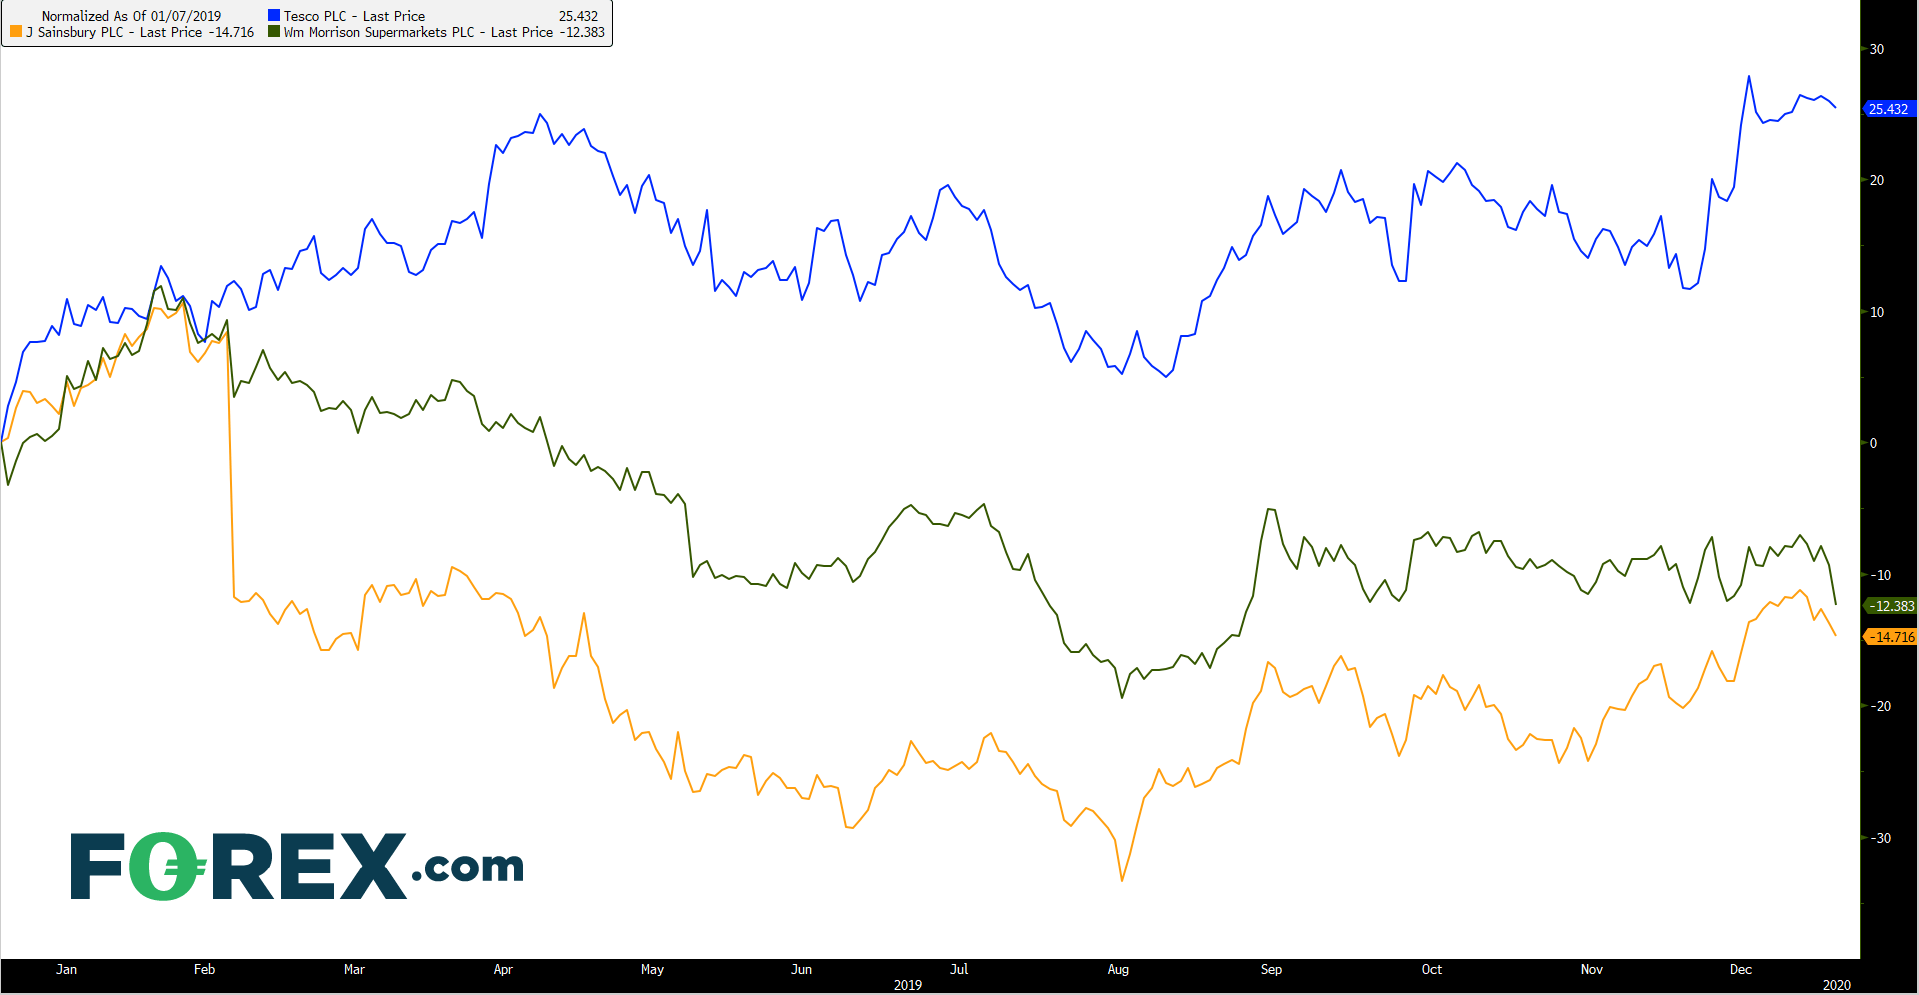 Market chart tracking the performance of the big 3: Tesco, Sainsburys, Morrisons. Published in January 2020 by FOREX.com